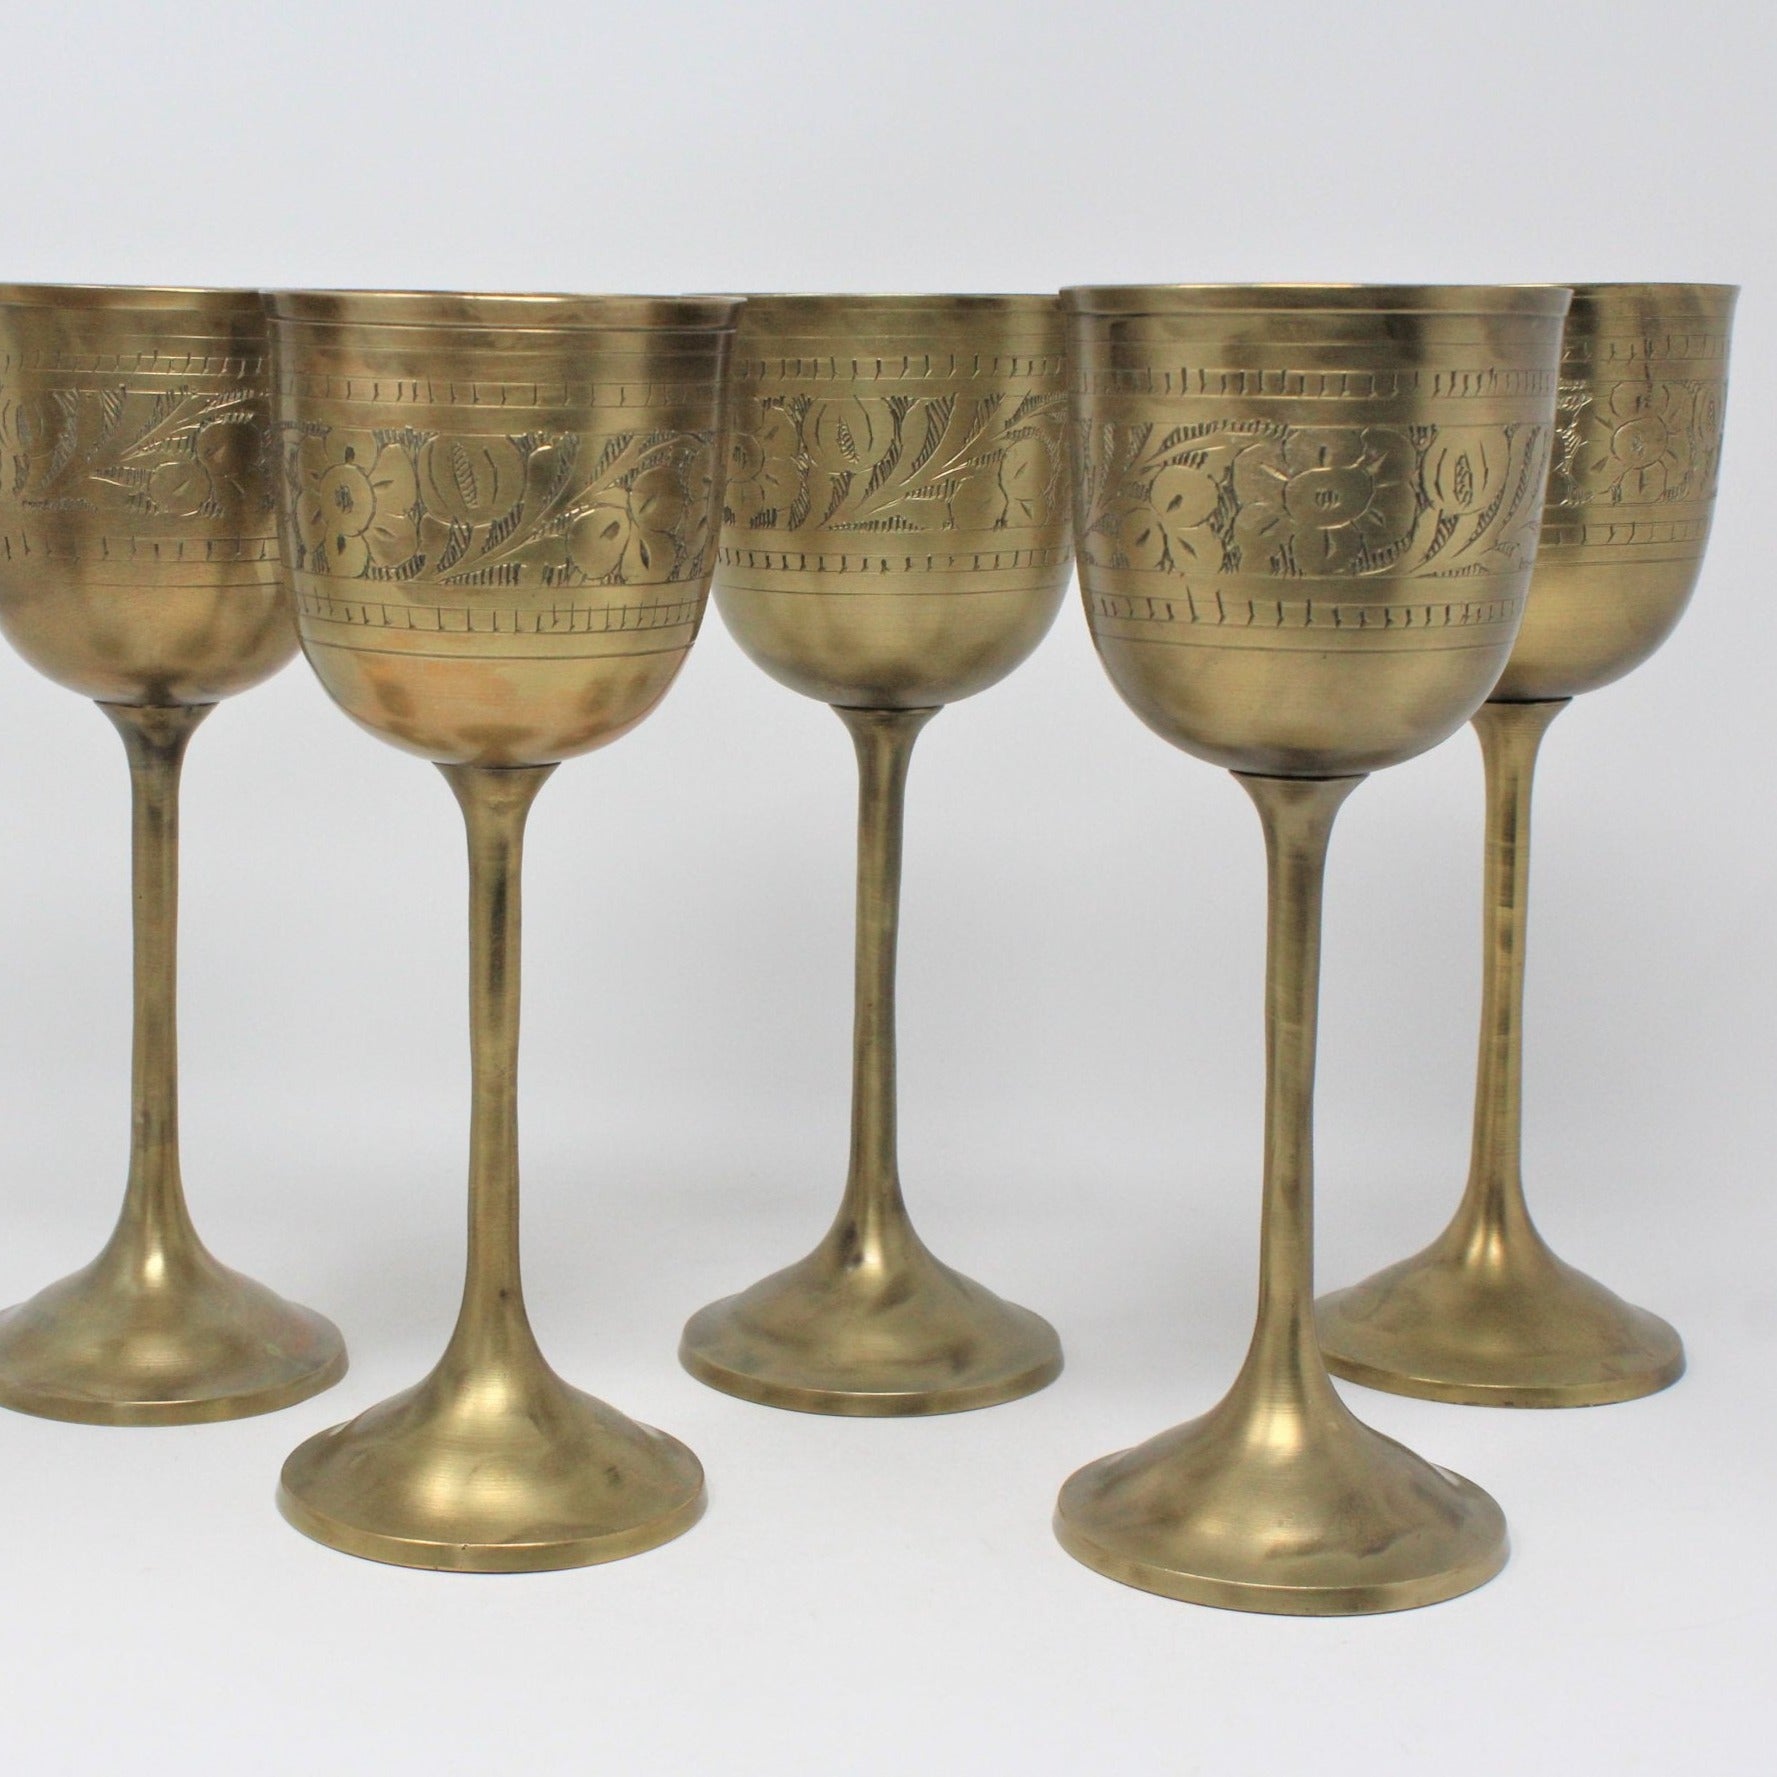 Vintage Set of 2 Solid Brass With Silver Plate Goblets Patina Wine